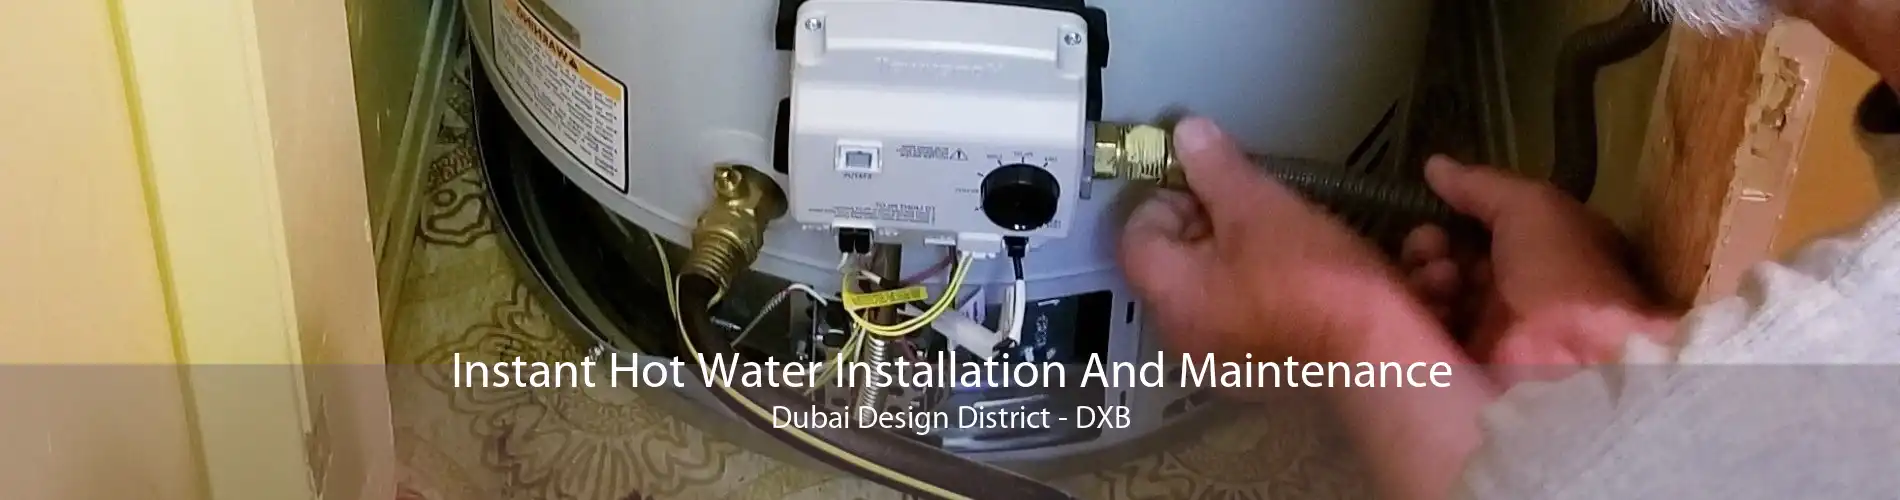 Instant Hot Water Installation And Maintenance Dubai Design District - DXB